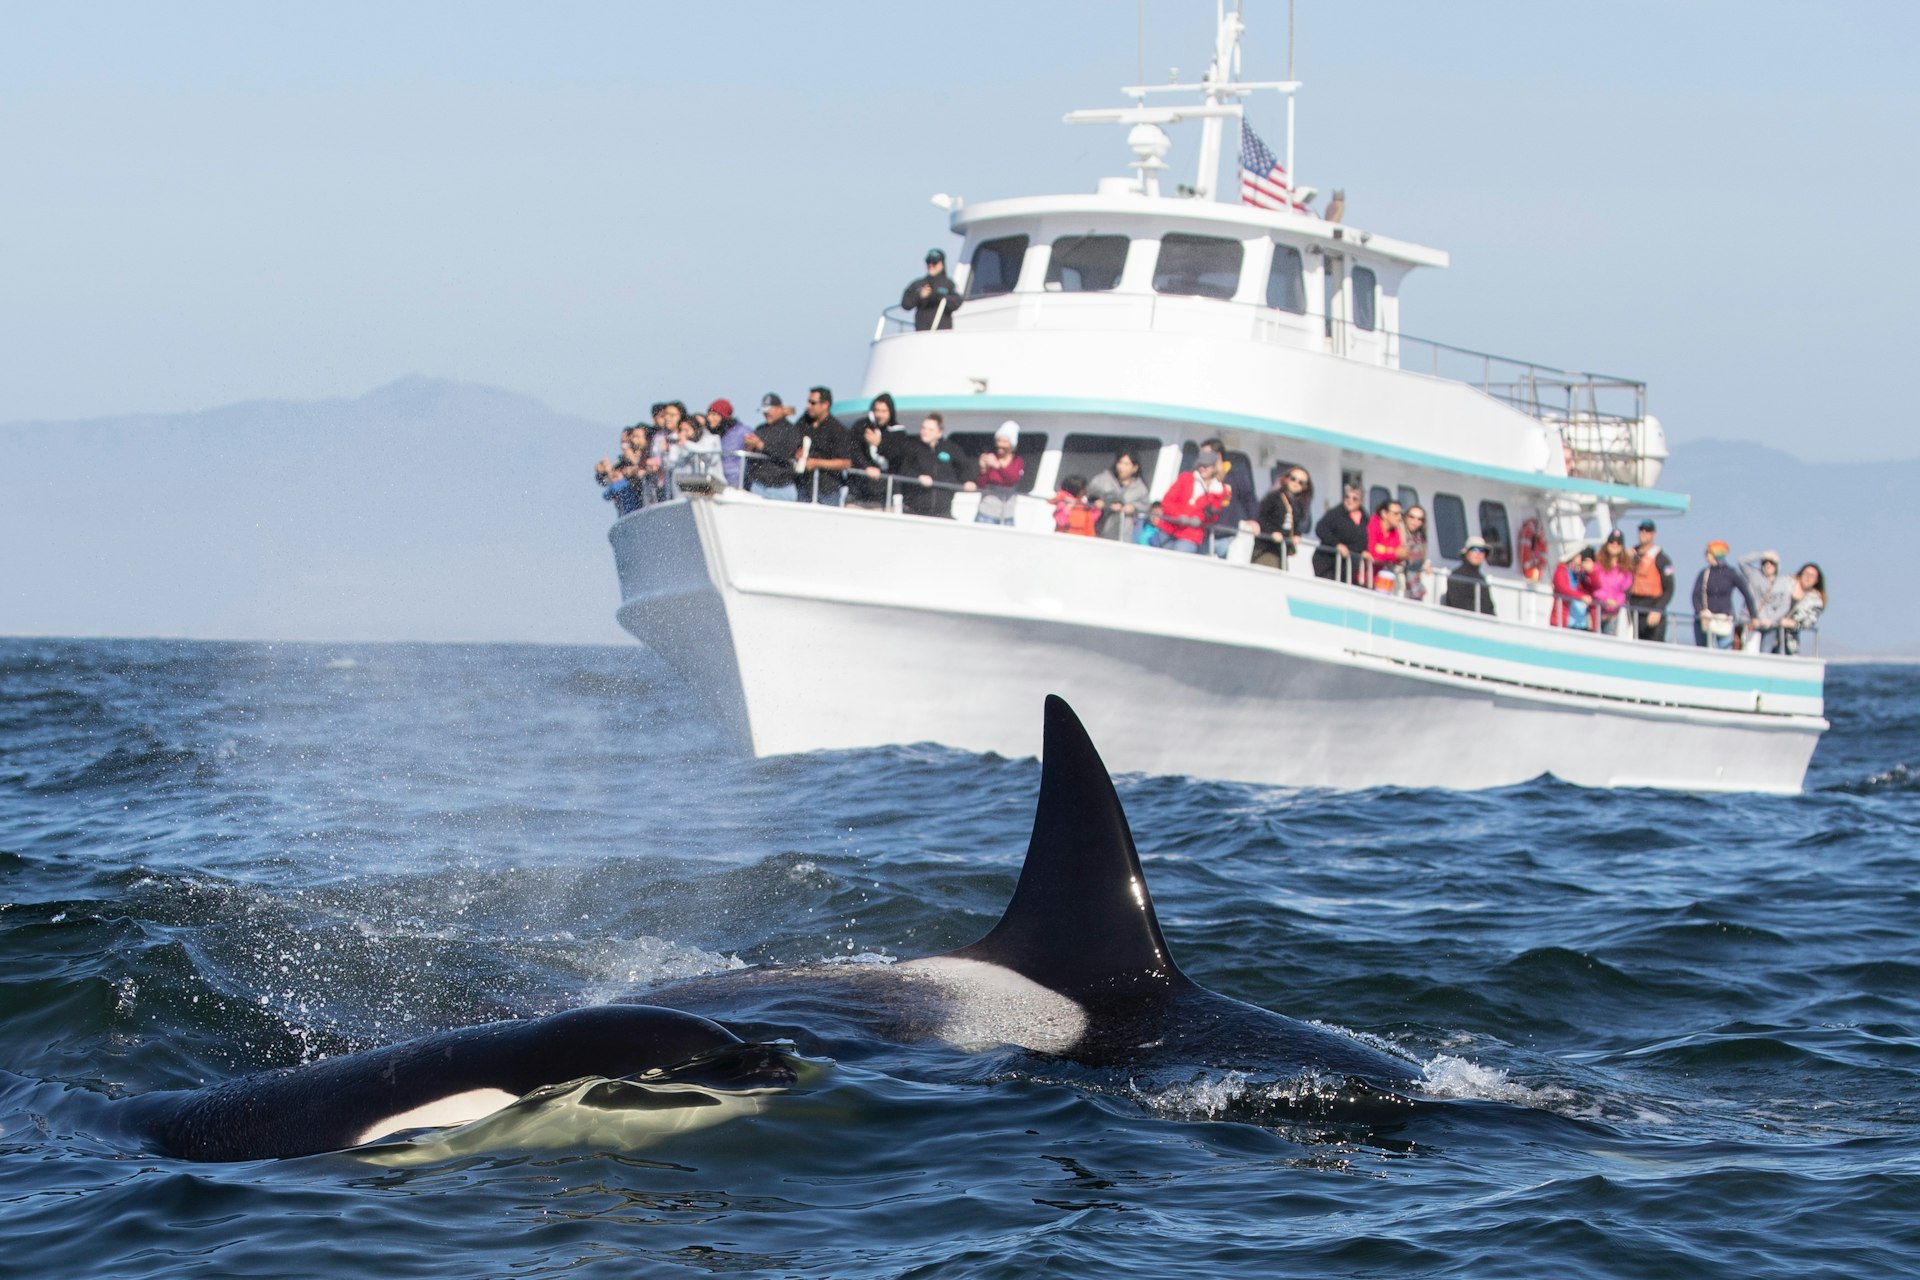 People on a whale-watching tour boat behind two orcas